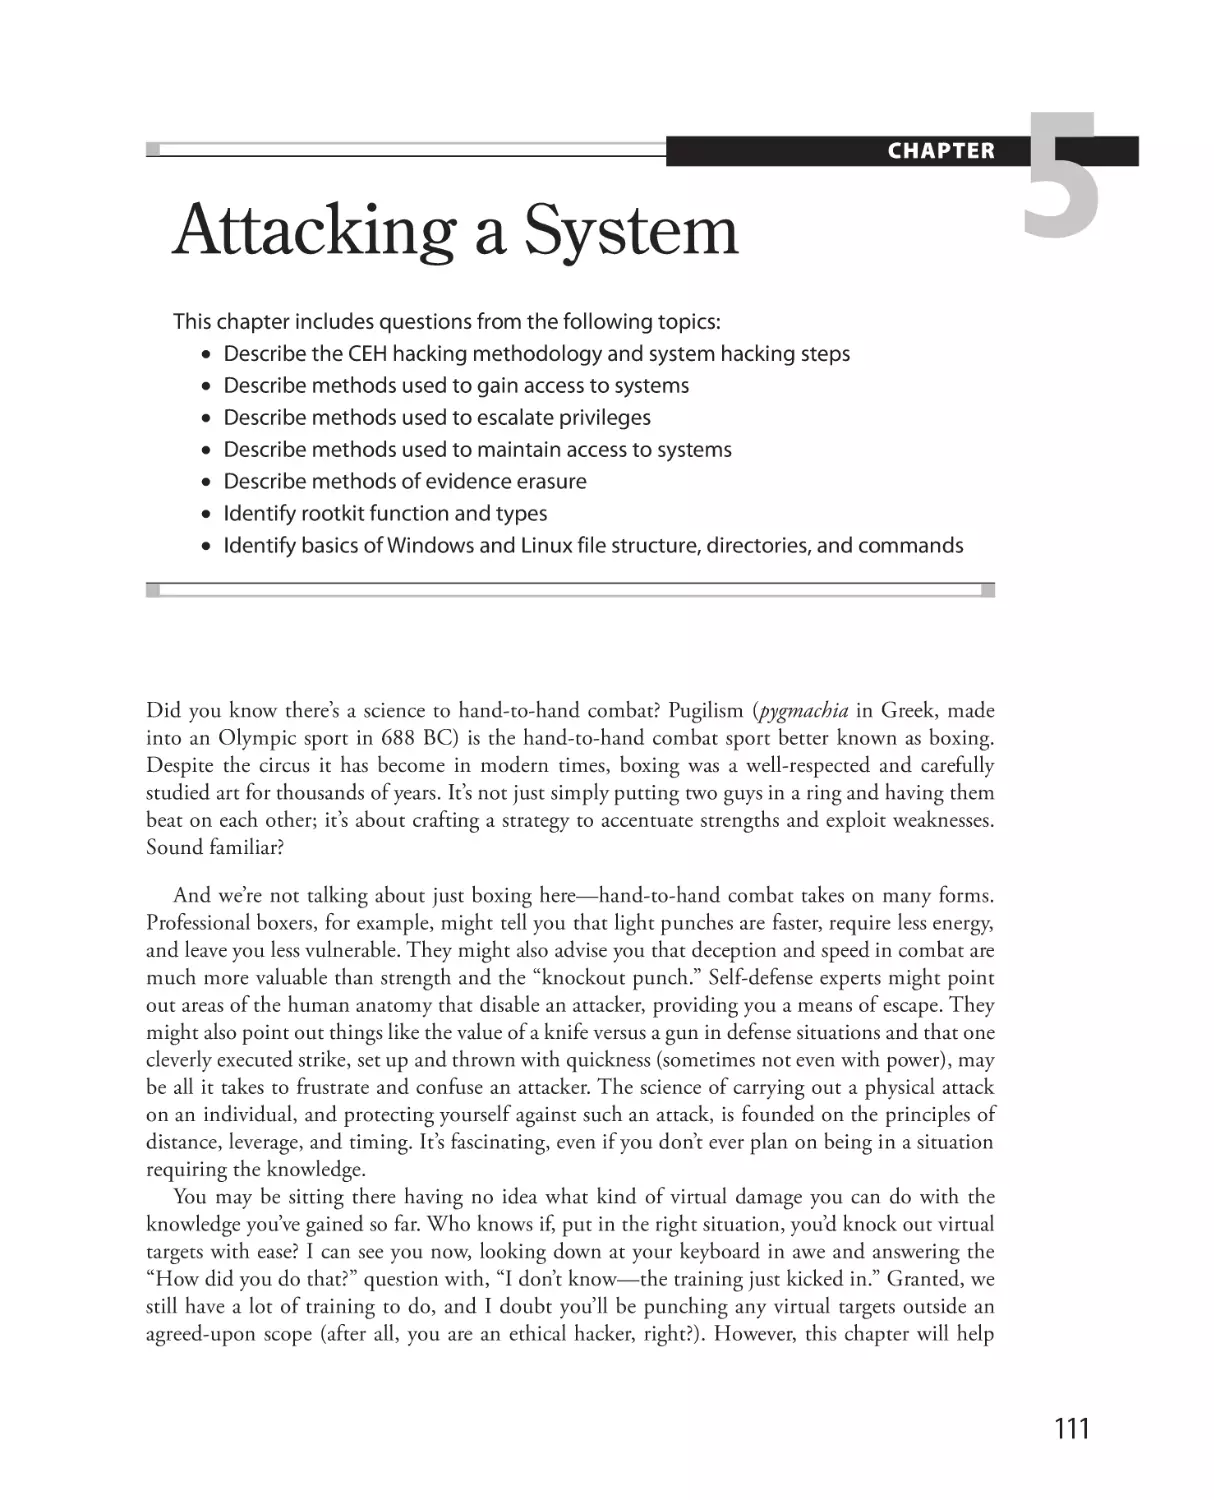 Attacking a System